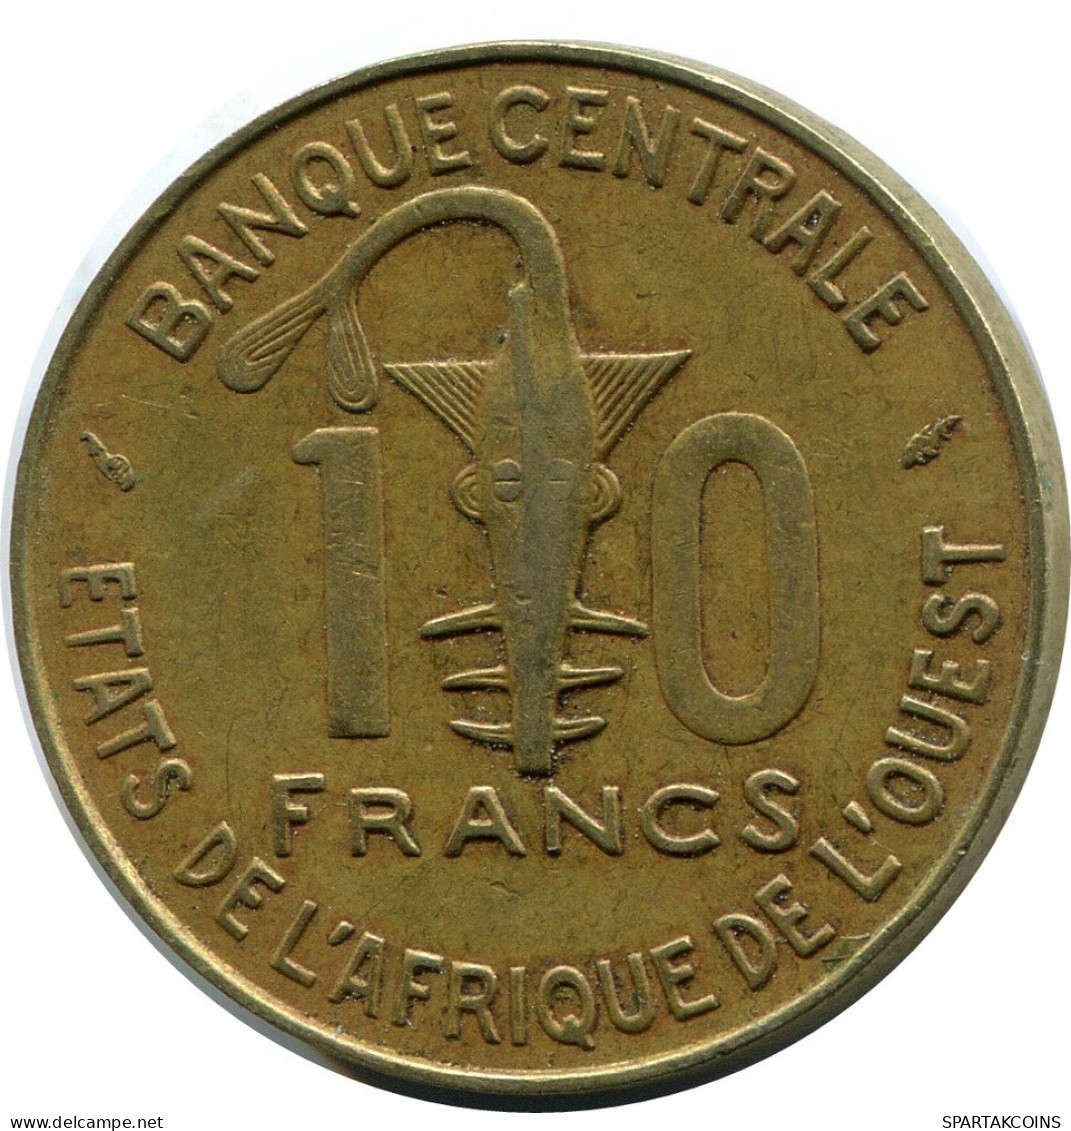 10 FRANCS CFA 1990 WESTERN AFRICAN STATES (BCEAO) Coin #AR856.U.A - Other - Africa